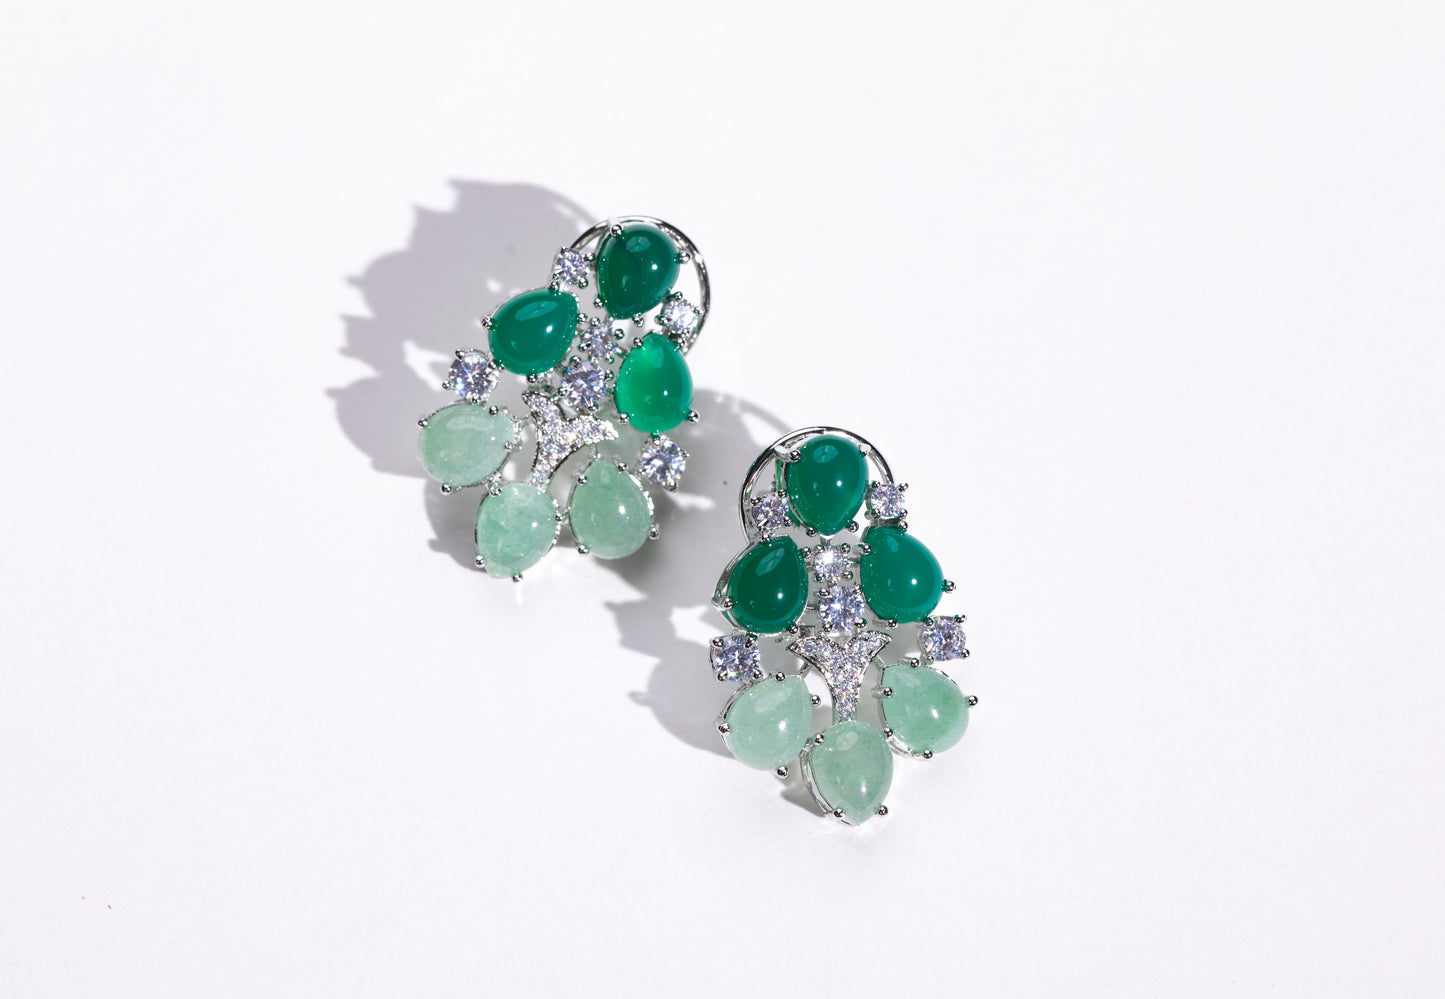 "Shop Now: Buy these stunning dual-tone green emerald earrings with Swarovski online